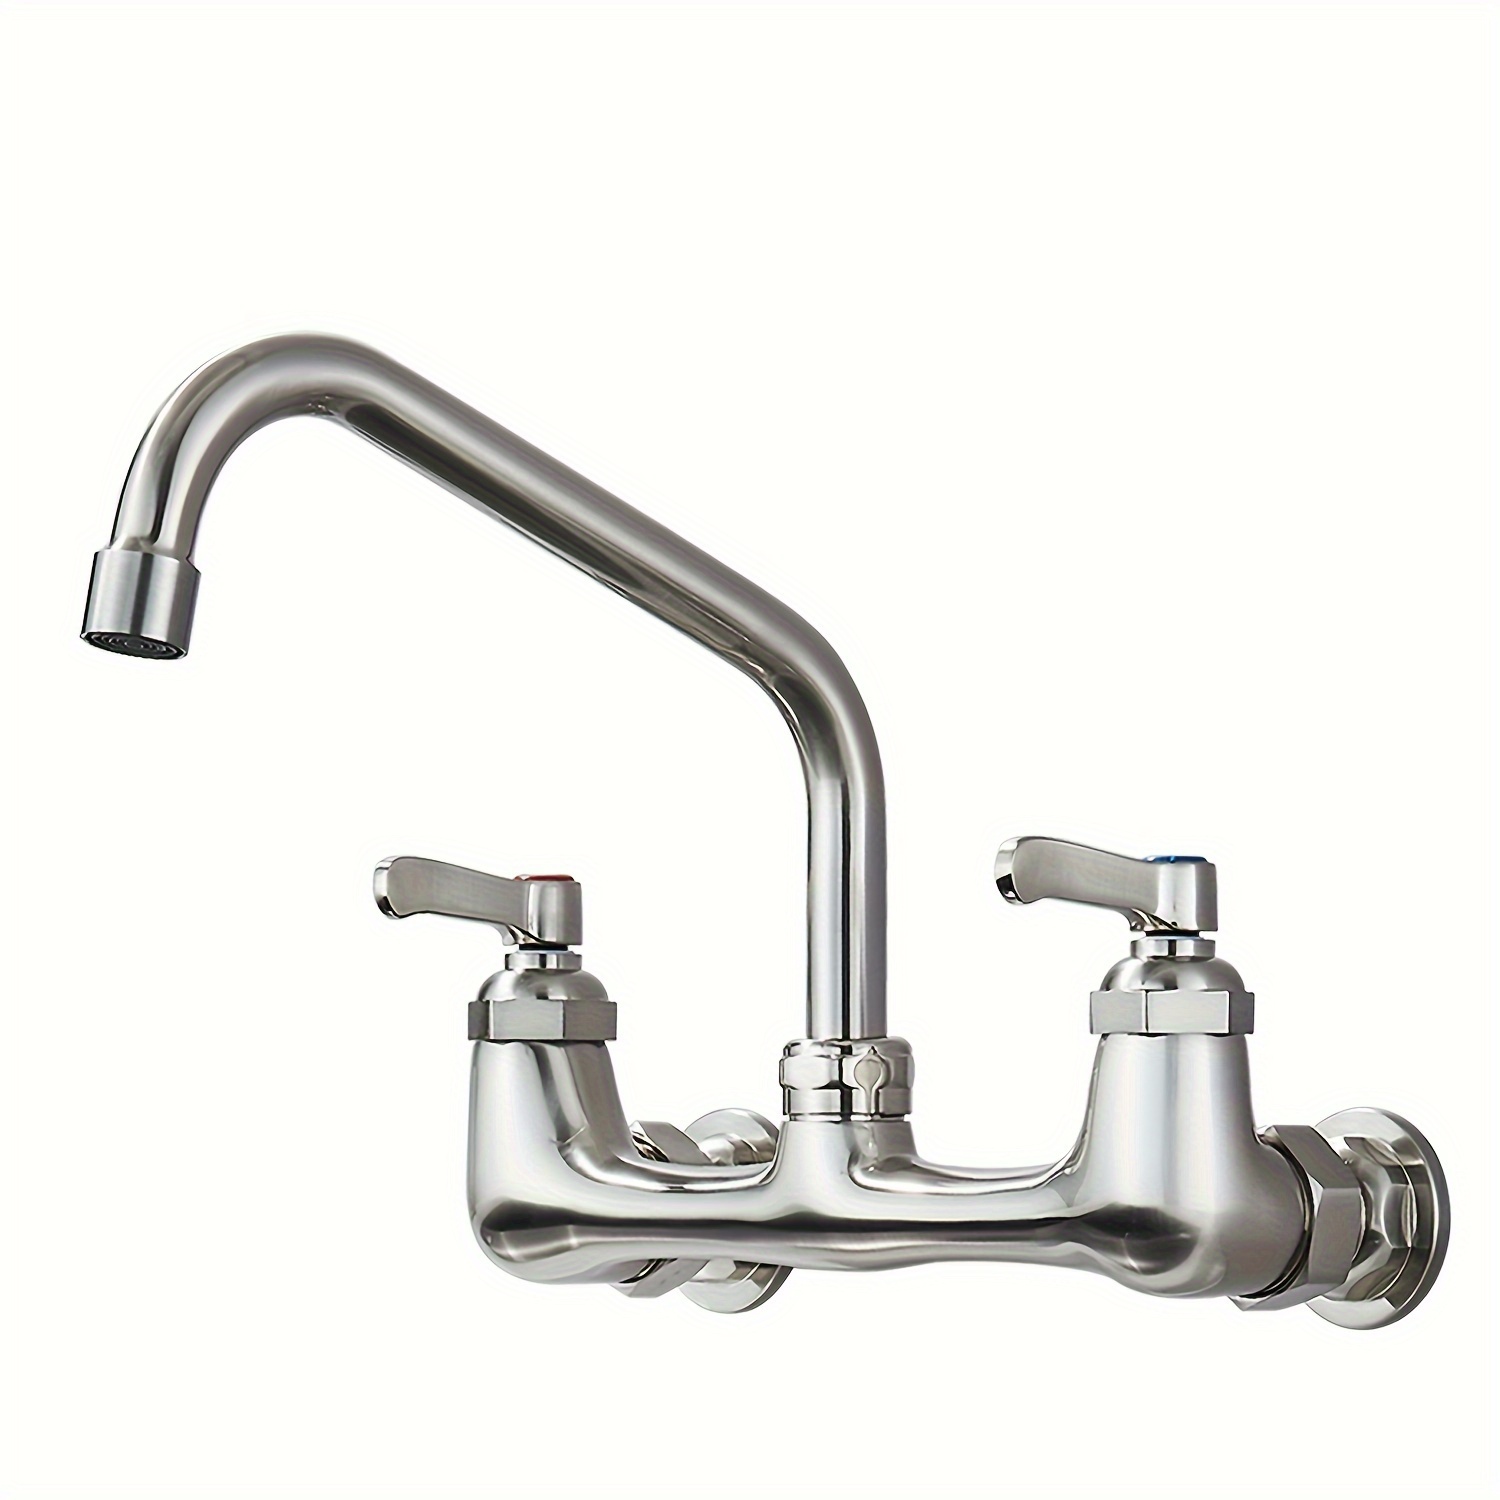 

Kitchen Faucet Wall Mounted 8" Centers Adjustabel Centers 1/2 Female Inlets 12" Swivel Spout 2-handles Utility Commercial Brushed Nickel Kitchen Sink Faucet Mixer Tap Brushed Nickel